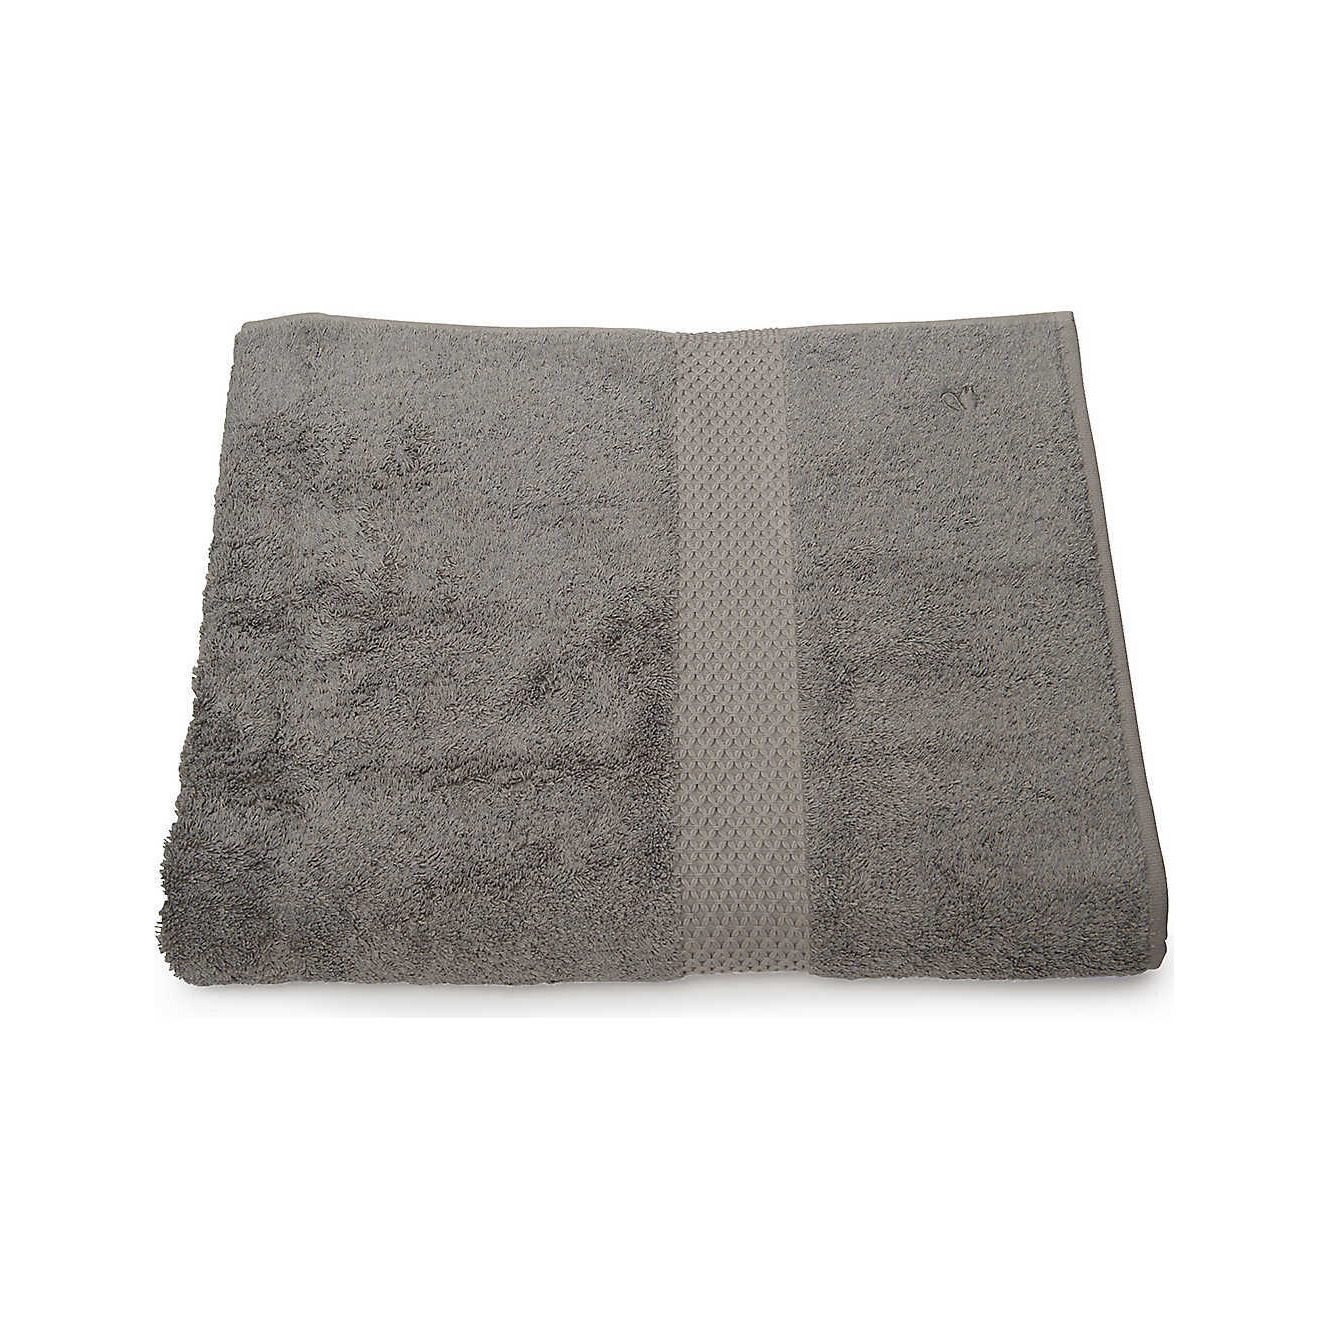 Yves Delorme Platine Etoile, Size: Hand Towel